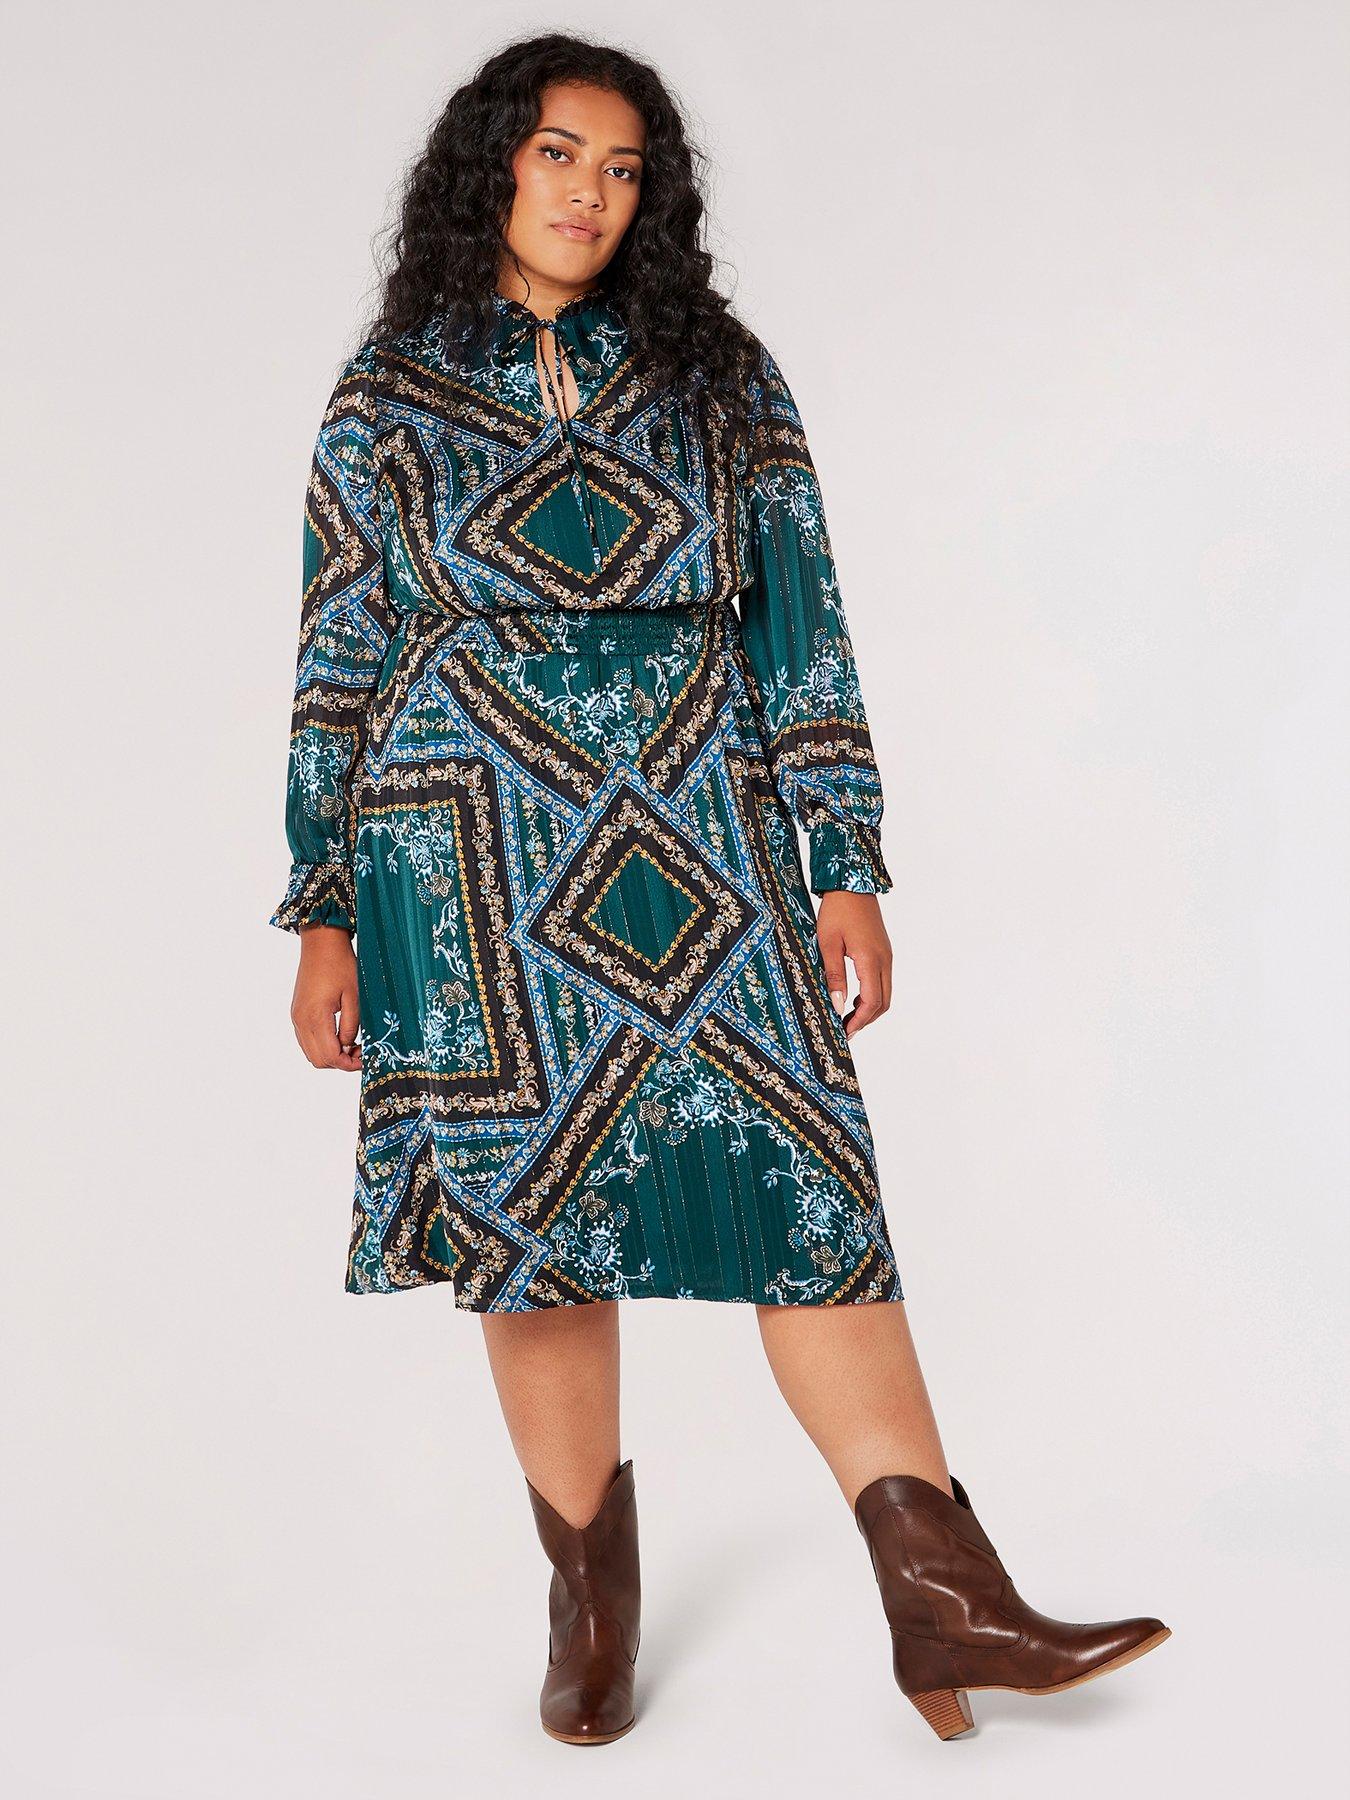 Shop Women's Dresses, All Occasions & Sizes